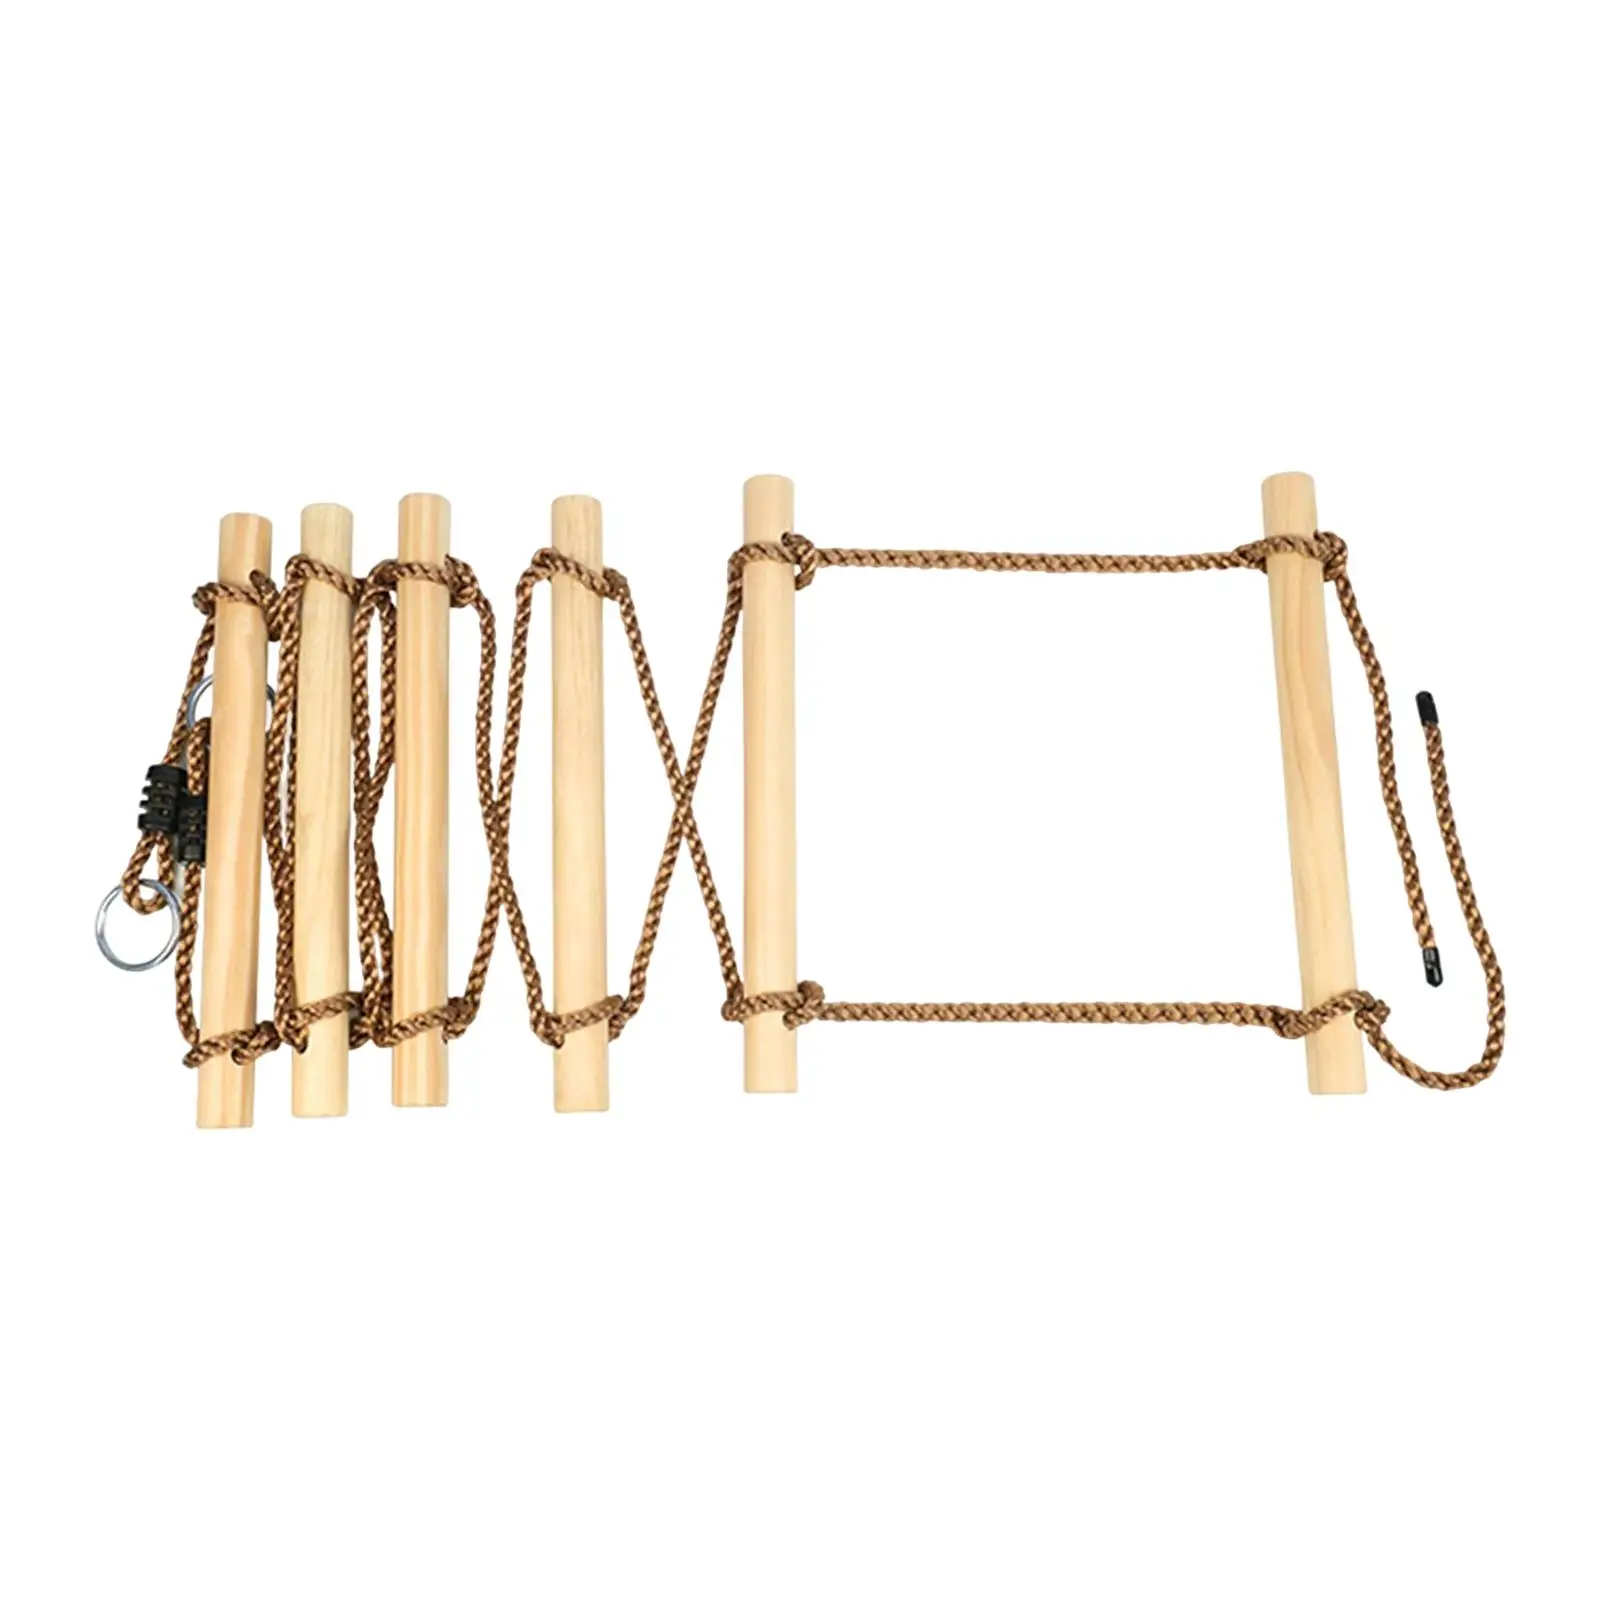 Climbing Rope Ladder for Kids with 6 Wooden Rungs Climber Attachments Climbing